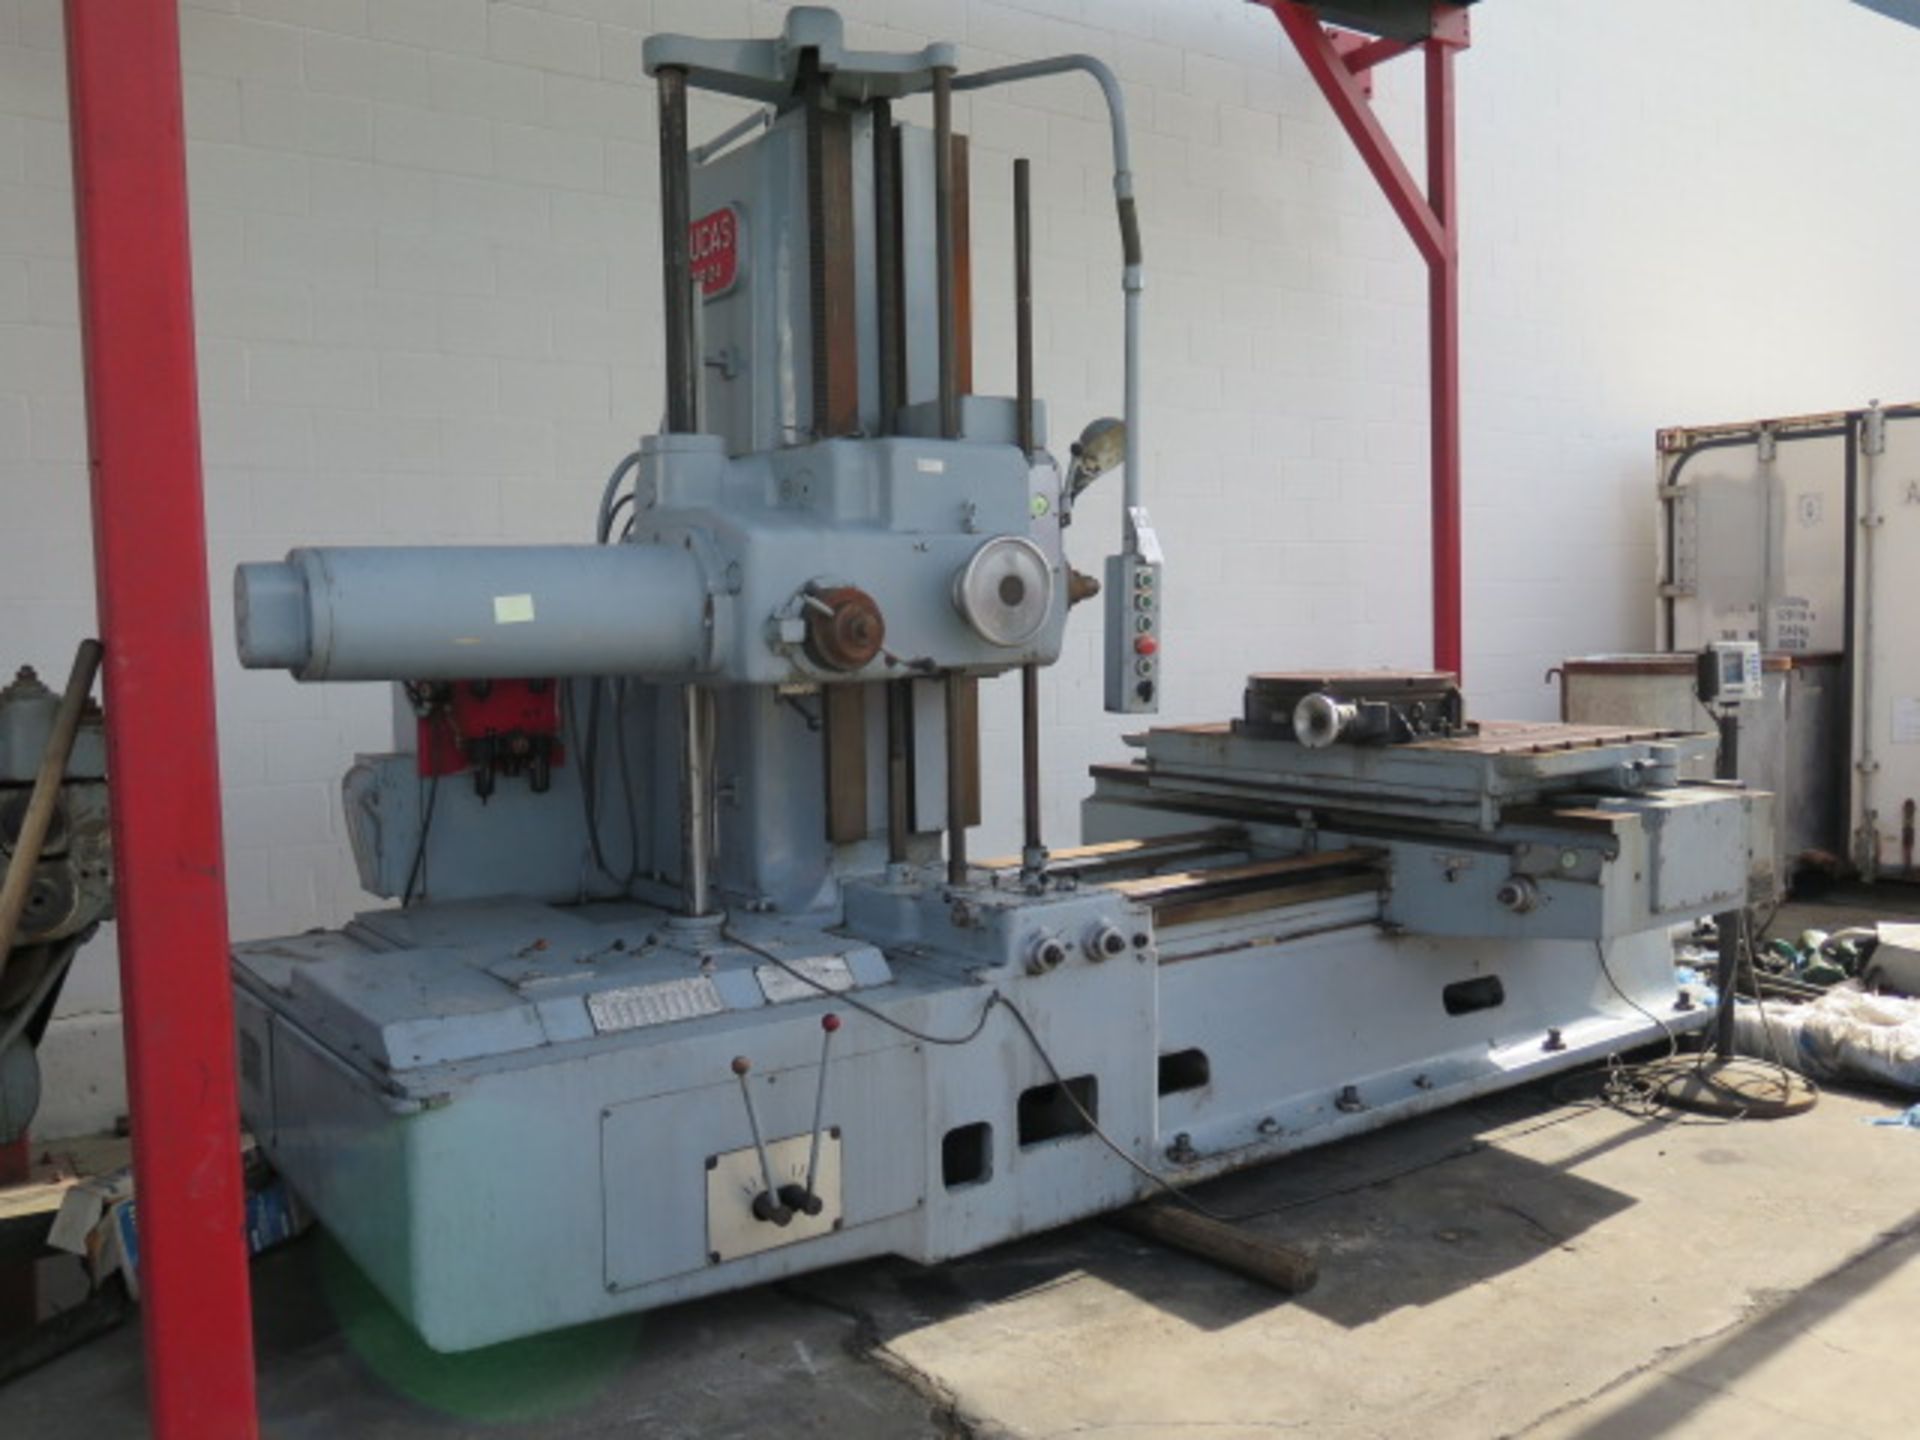 Lucas mdl. 41B-24 Horizontal Boring Mill w/ Acu-Rite Programmable DRO, 13-1500 RPM, Power Feeds, 36” - Image 2 of 11